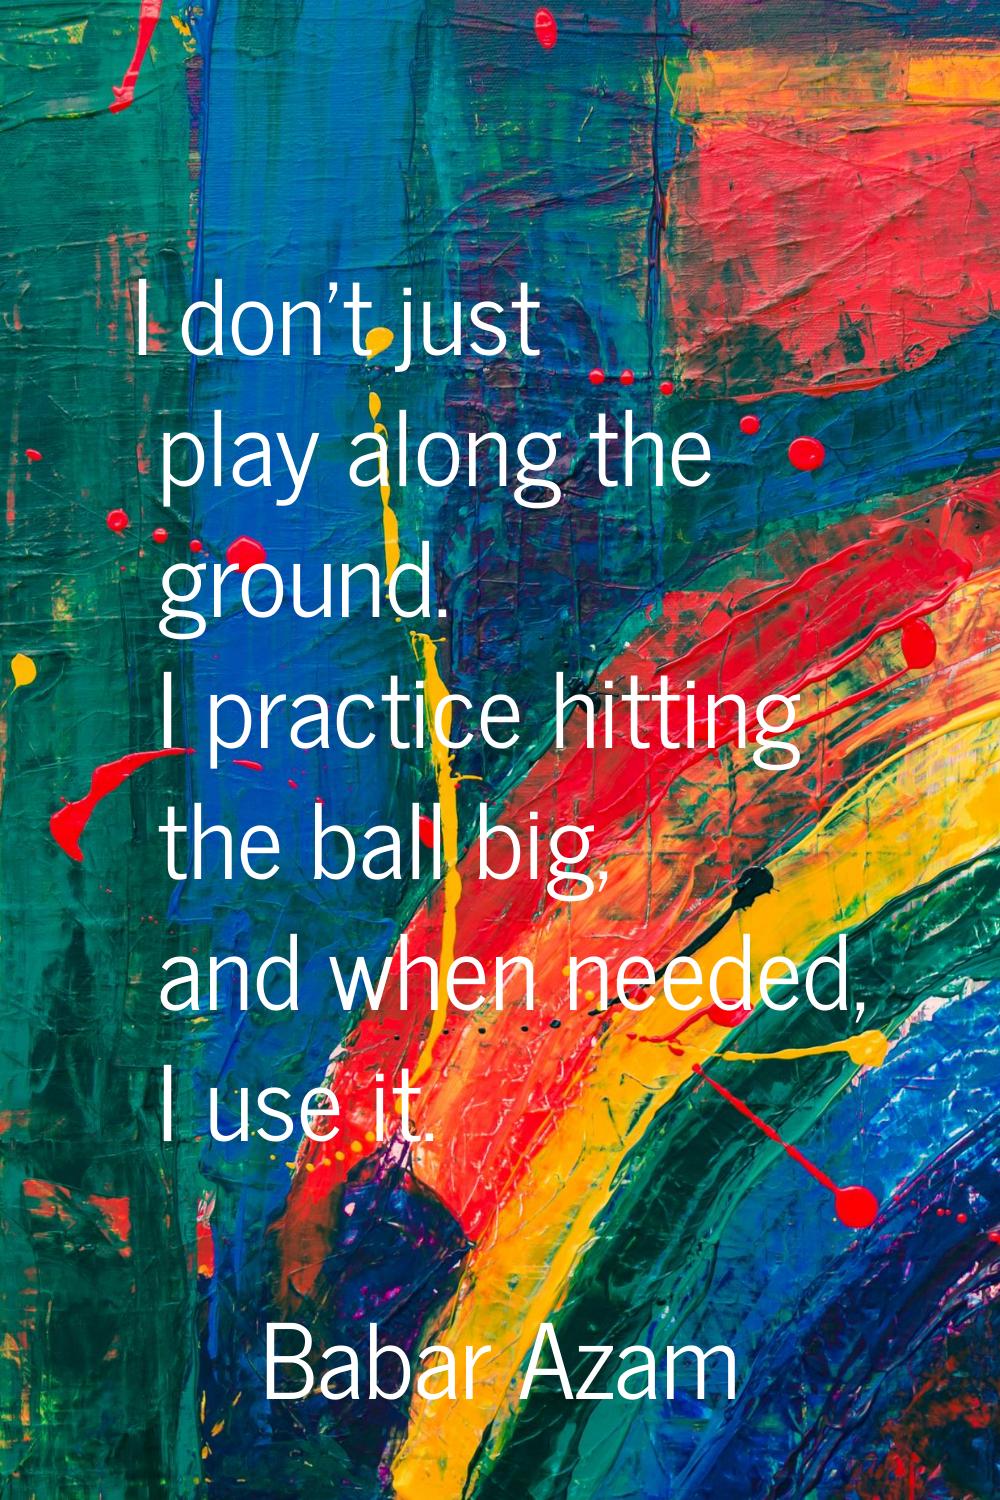 I don't just play along the ground. I practice hitting the ball big, and when needed, I use it.